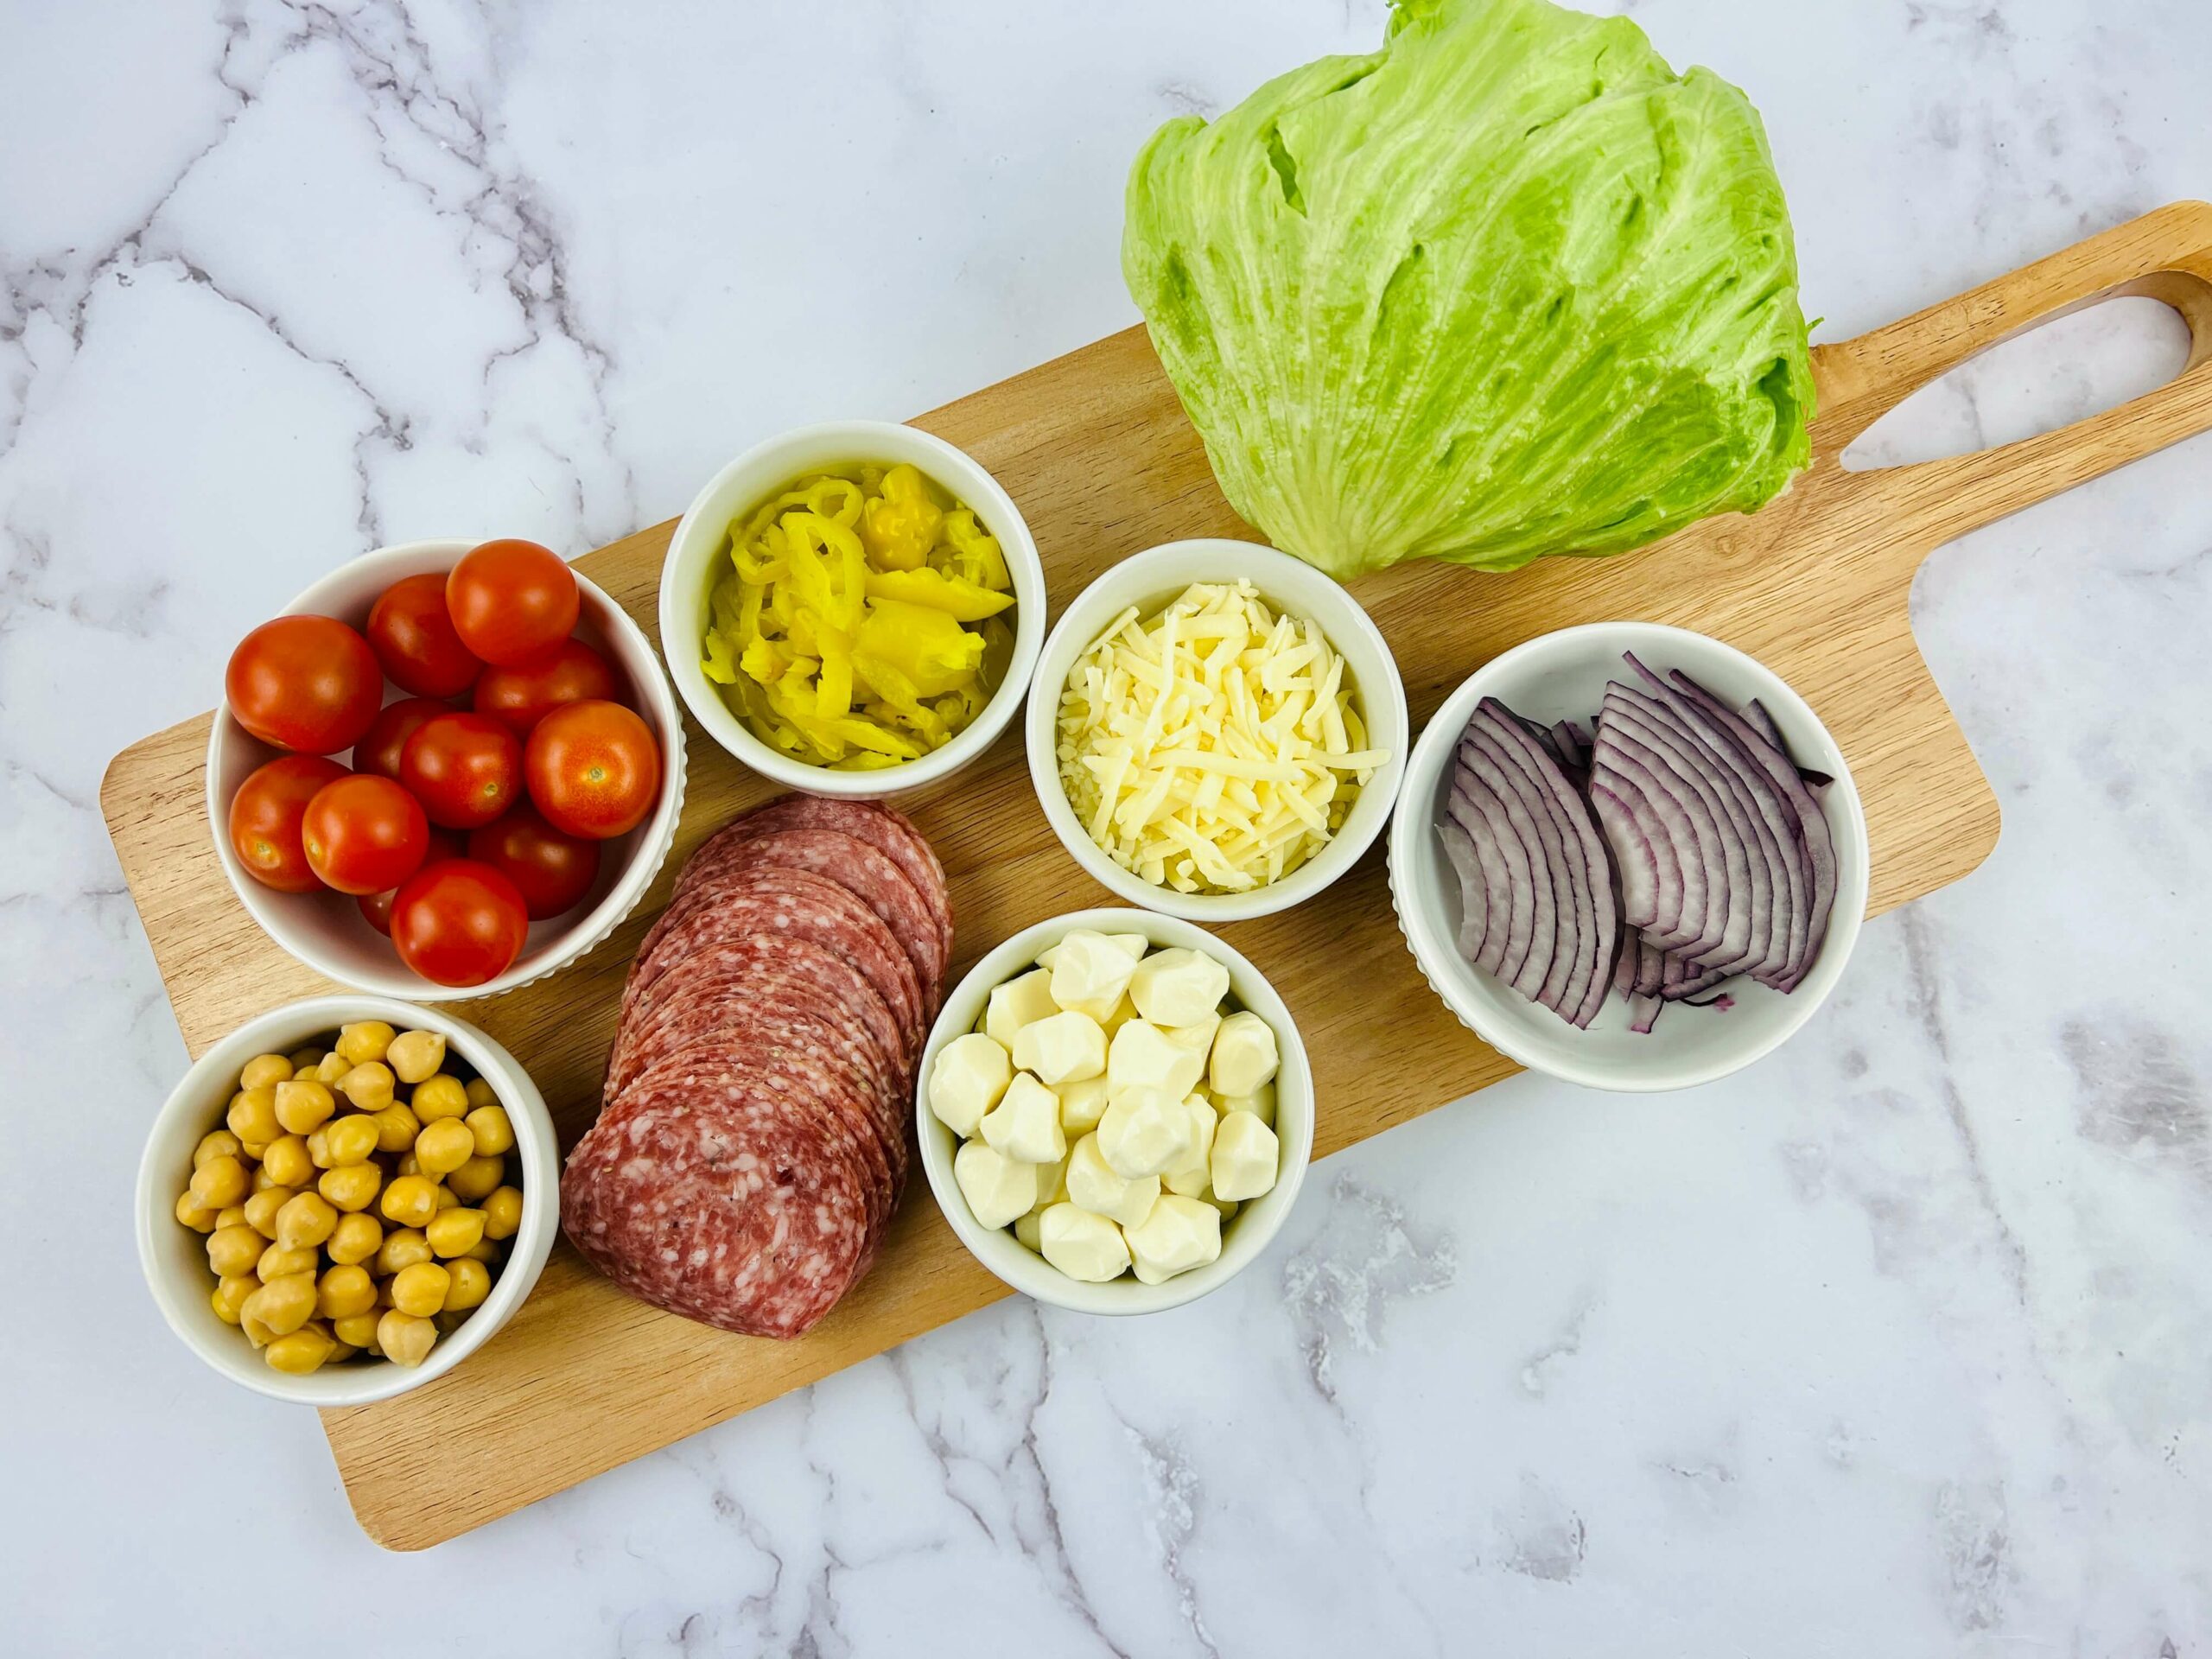 A cutting board with ingredients, including meat, vegetables, and chickpeas.